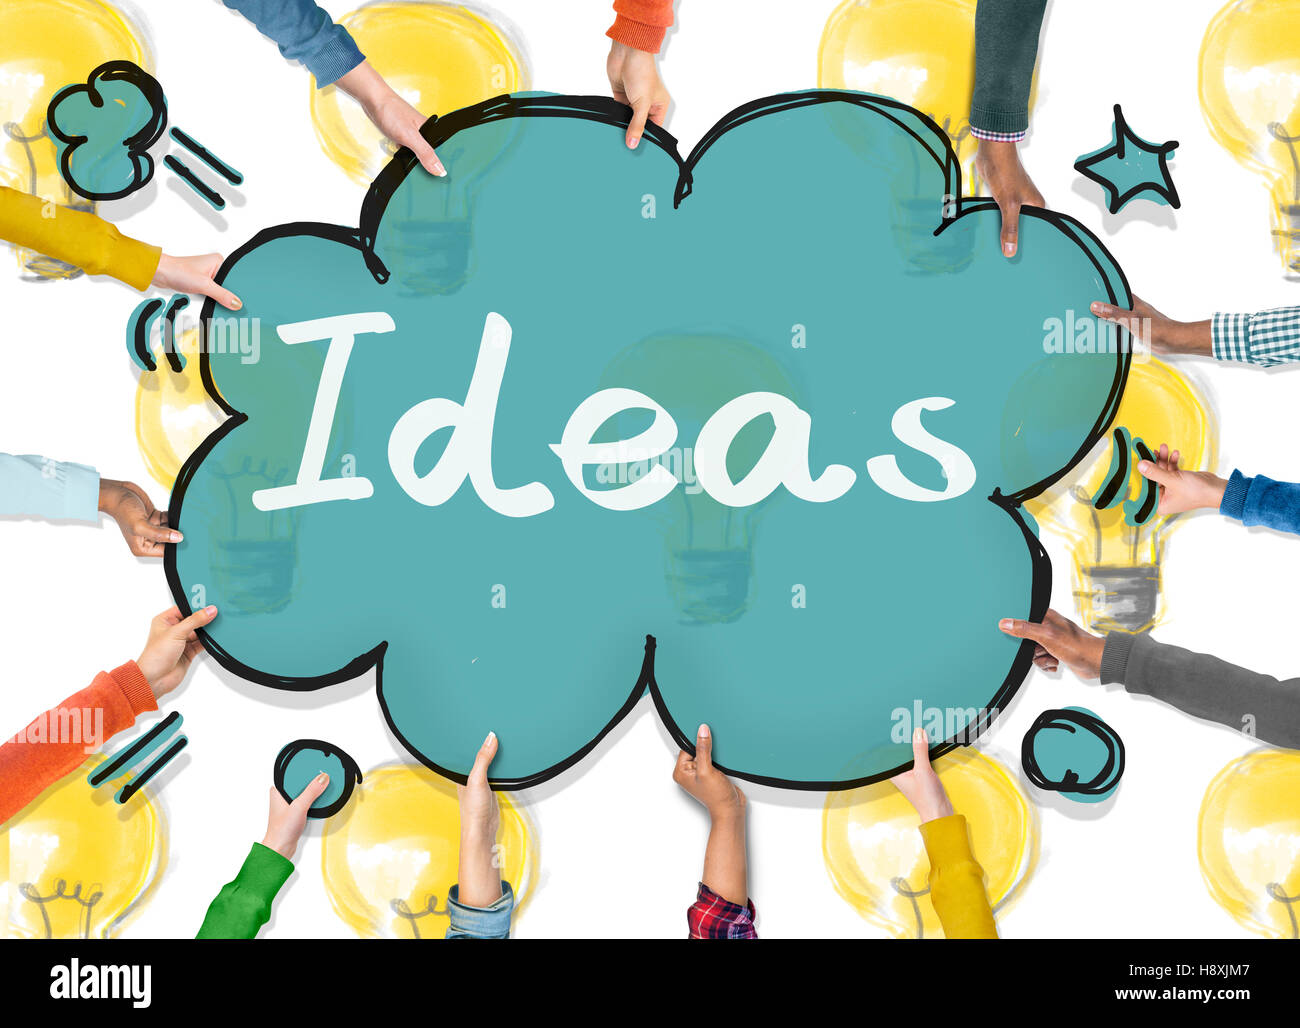 Ideas Innovation Tactics Thoughts Plan Concept Stock Photo